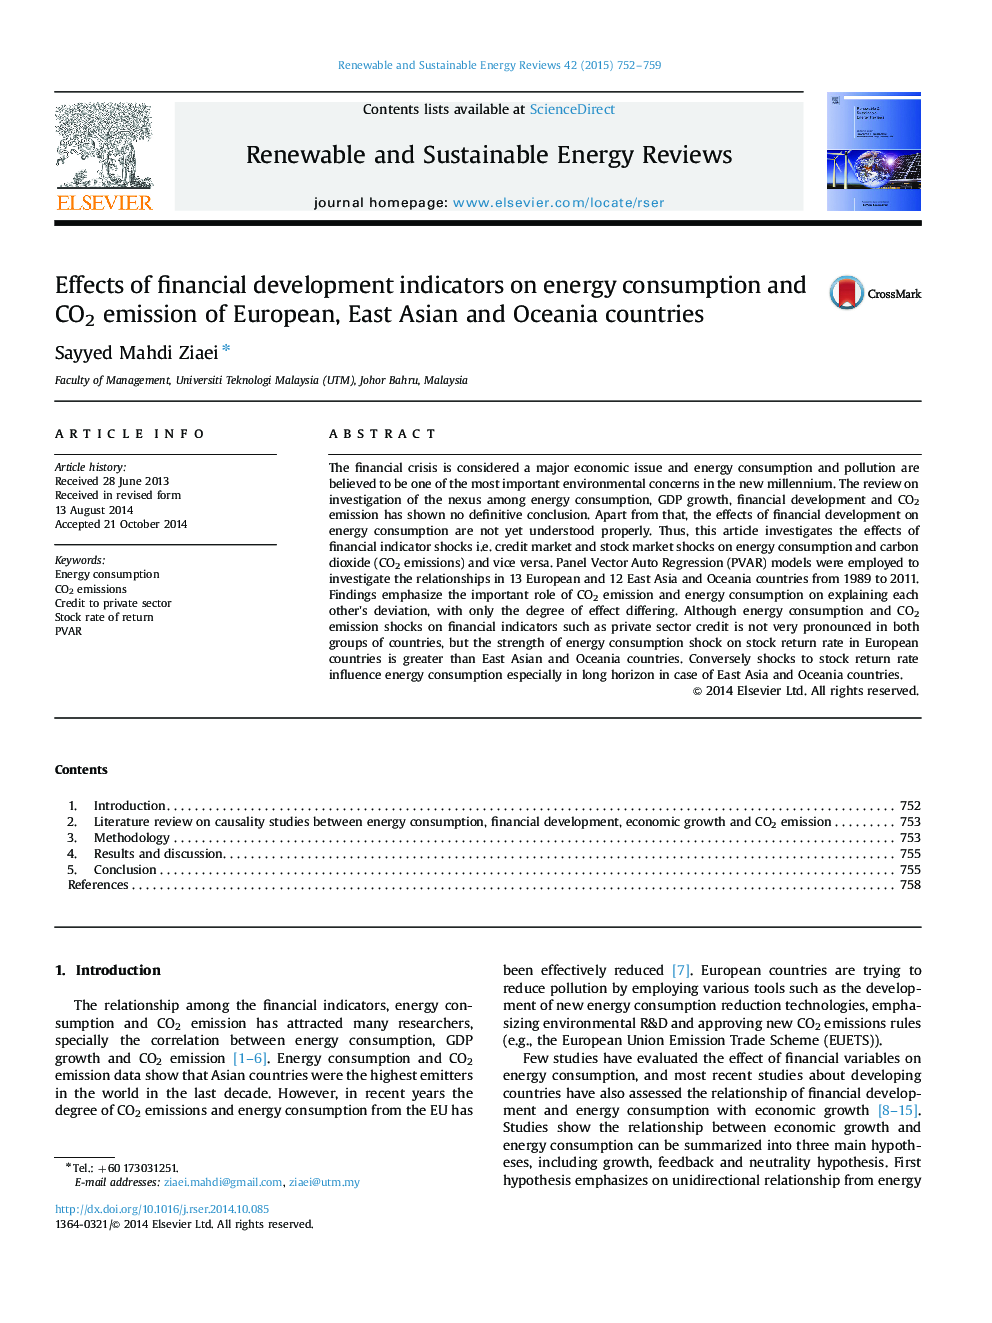 Effects of financial development indicators on energy consumption and CO2 emission of European, East Asian and Oceania countries